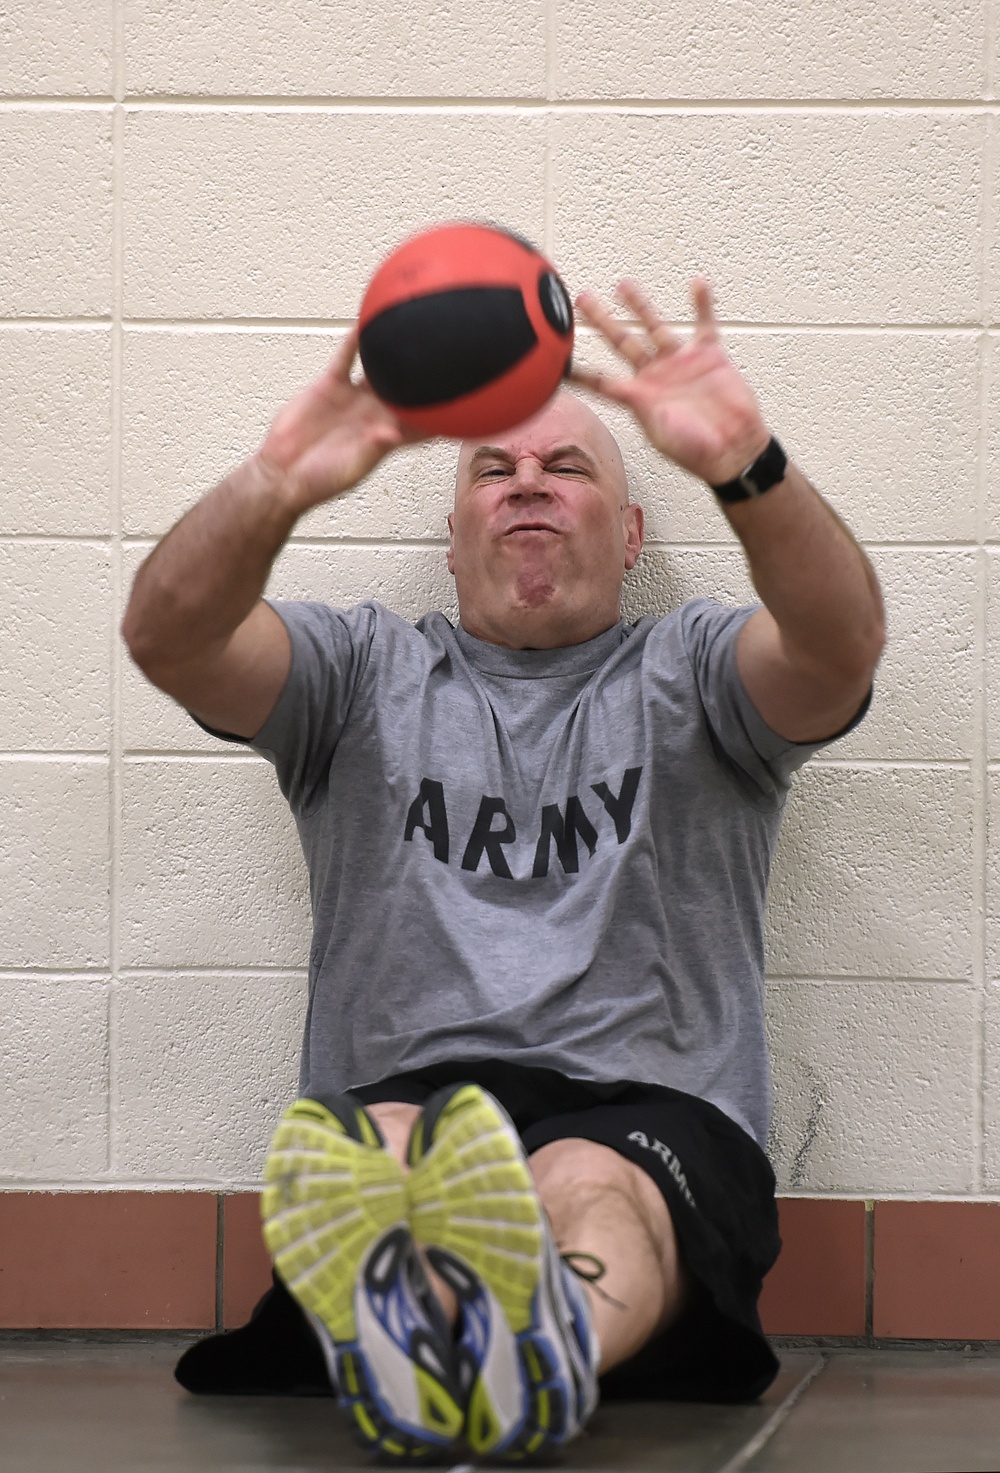 OPAT raises the bar on physical readiness of recruits